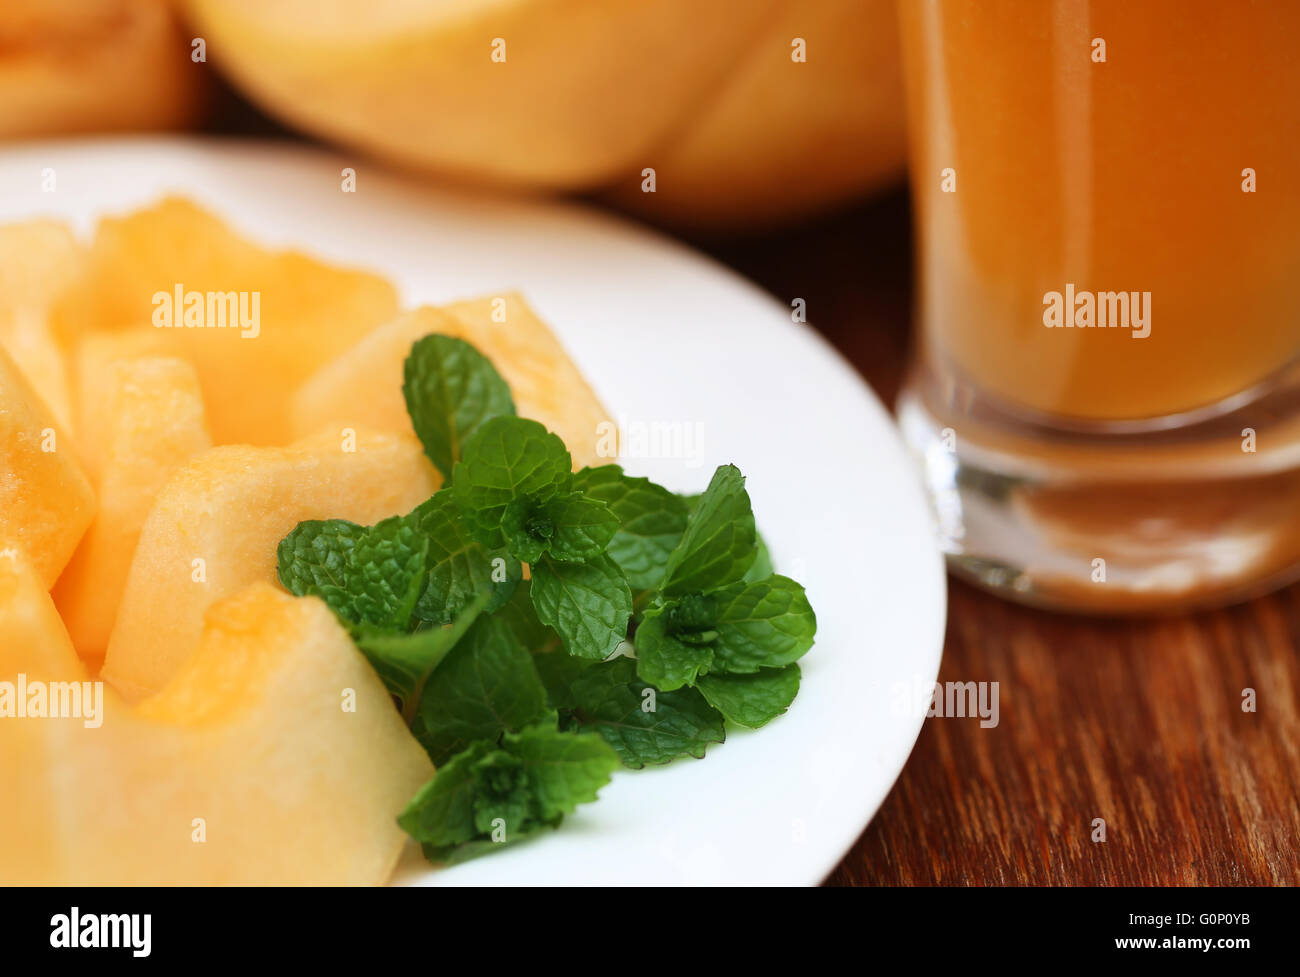 Juice of cucumis melo or muskmelon with green mint leaves Stock Photo